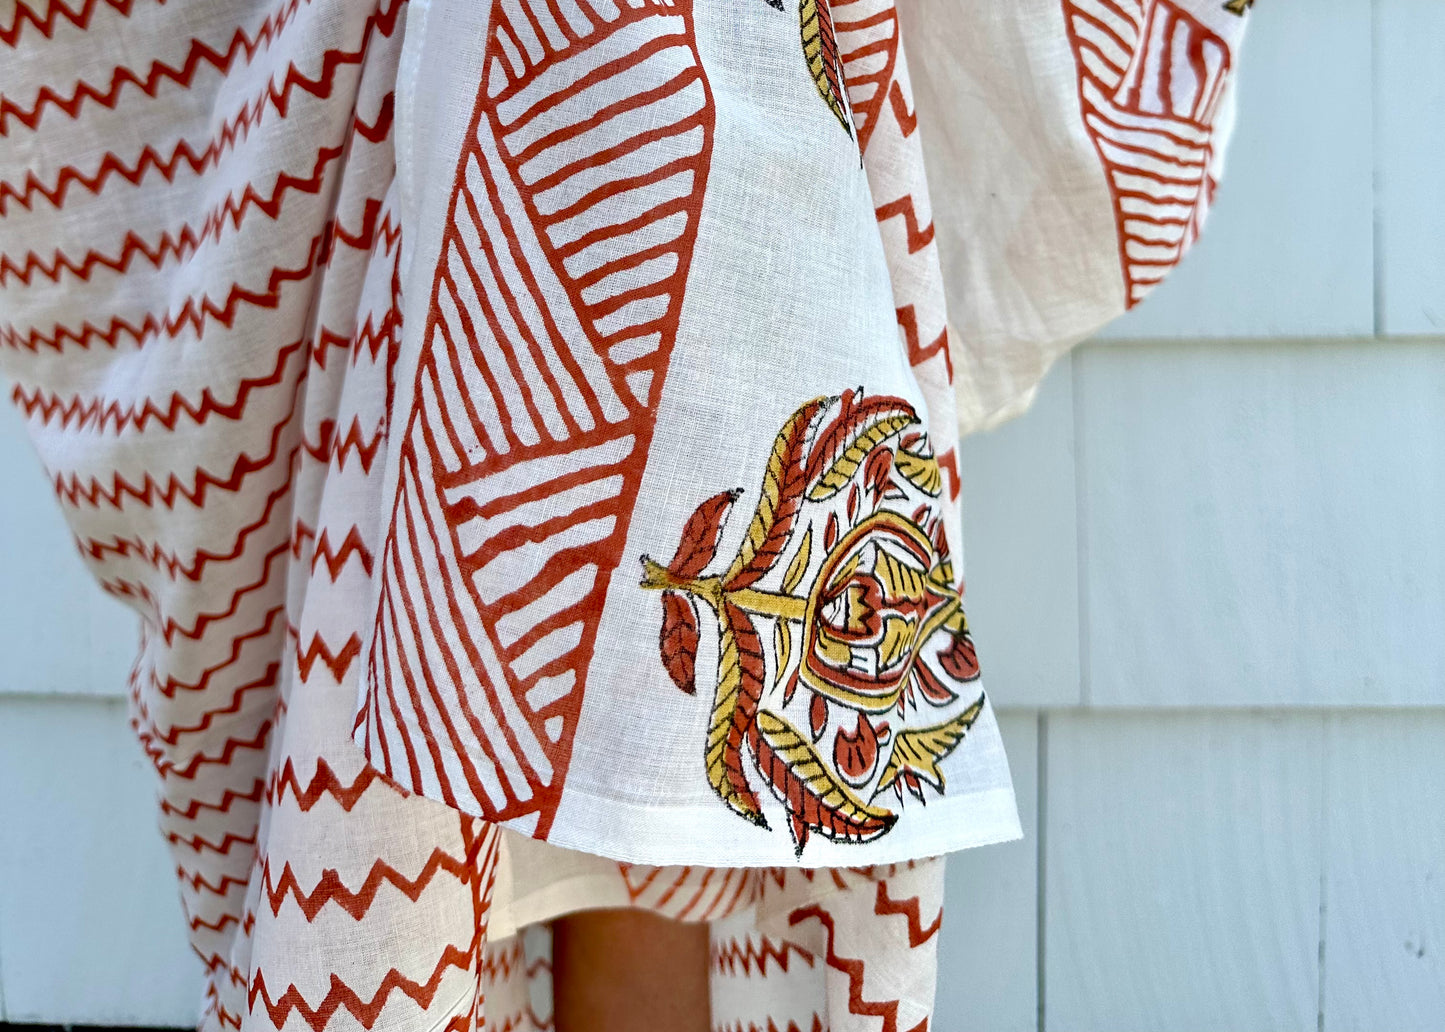 Brown and White Block Print Cotton Sarong, Cotton Summer Scarf, Beachwear, Swimsuit Coverup, Bachelorette Gift - DharBazaar